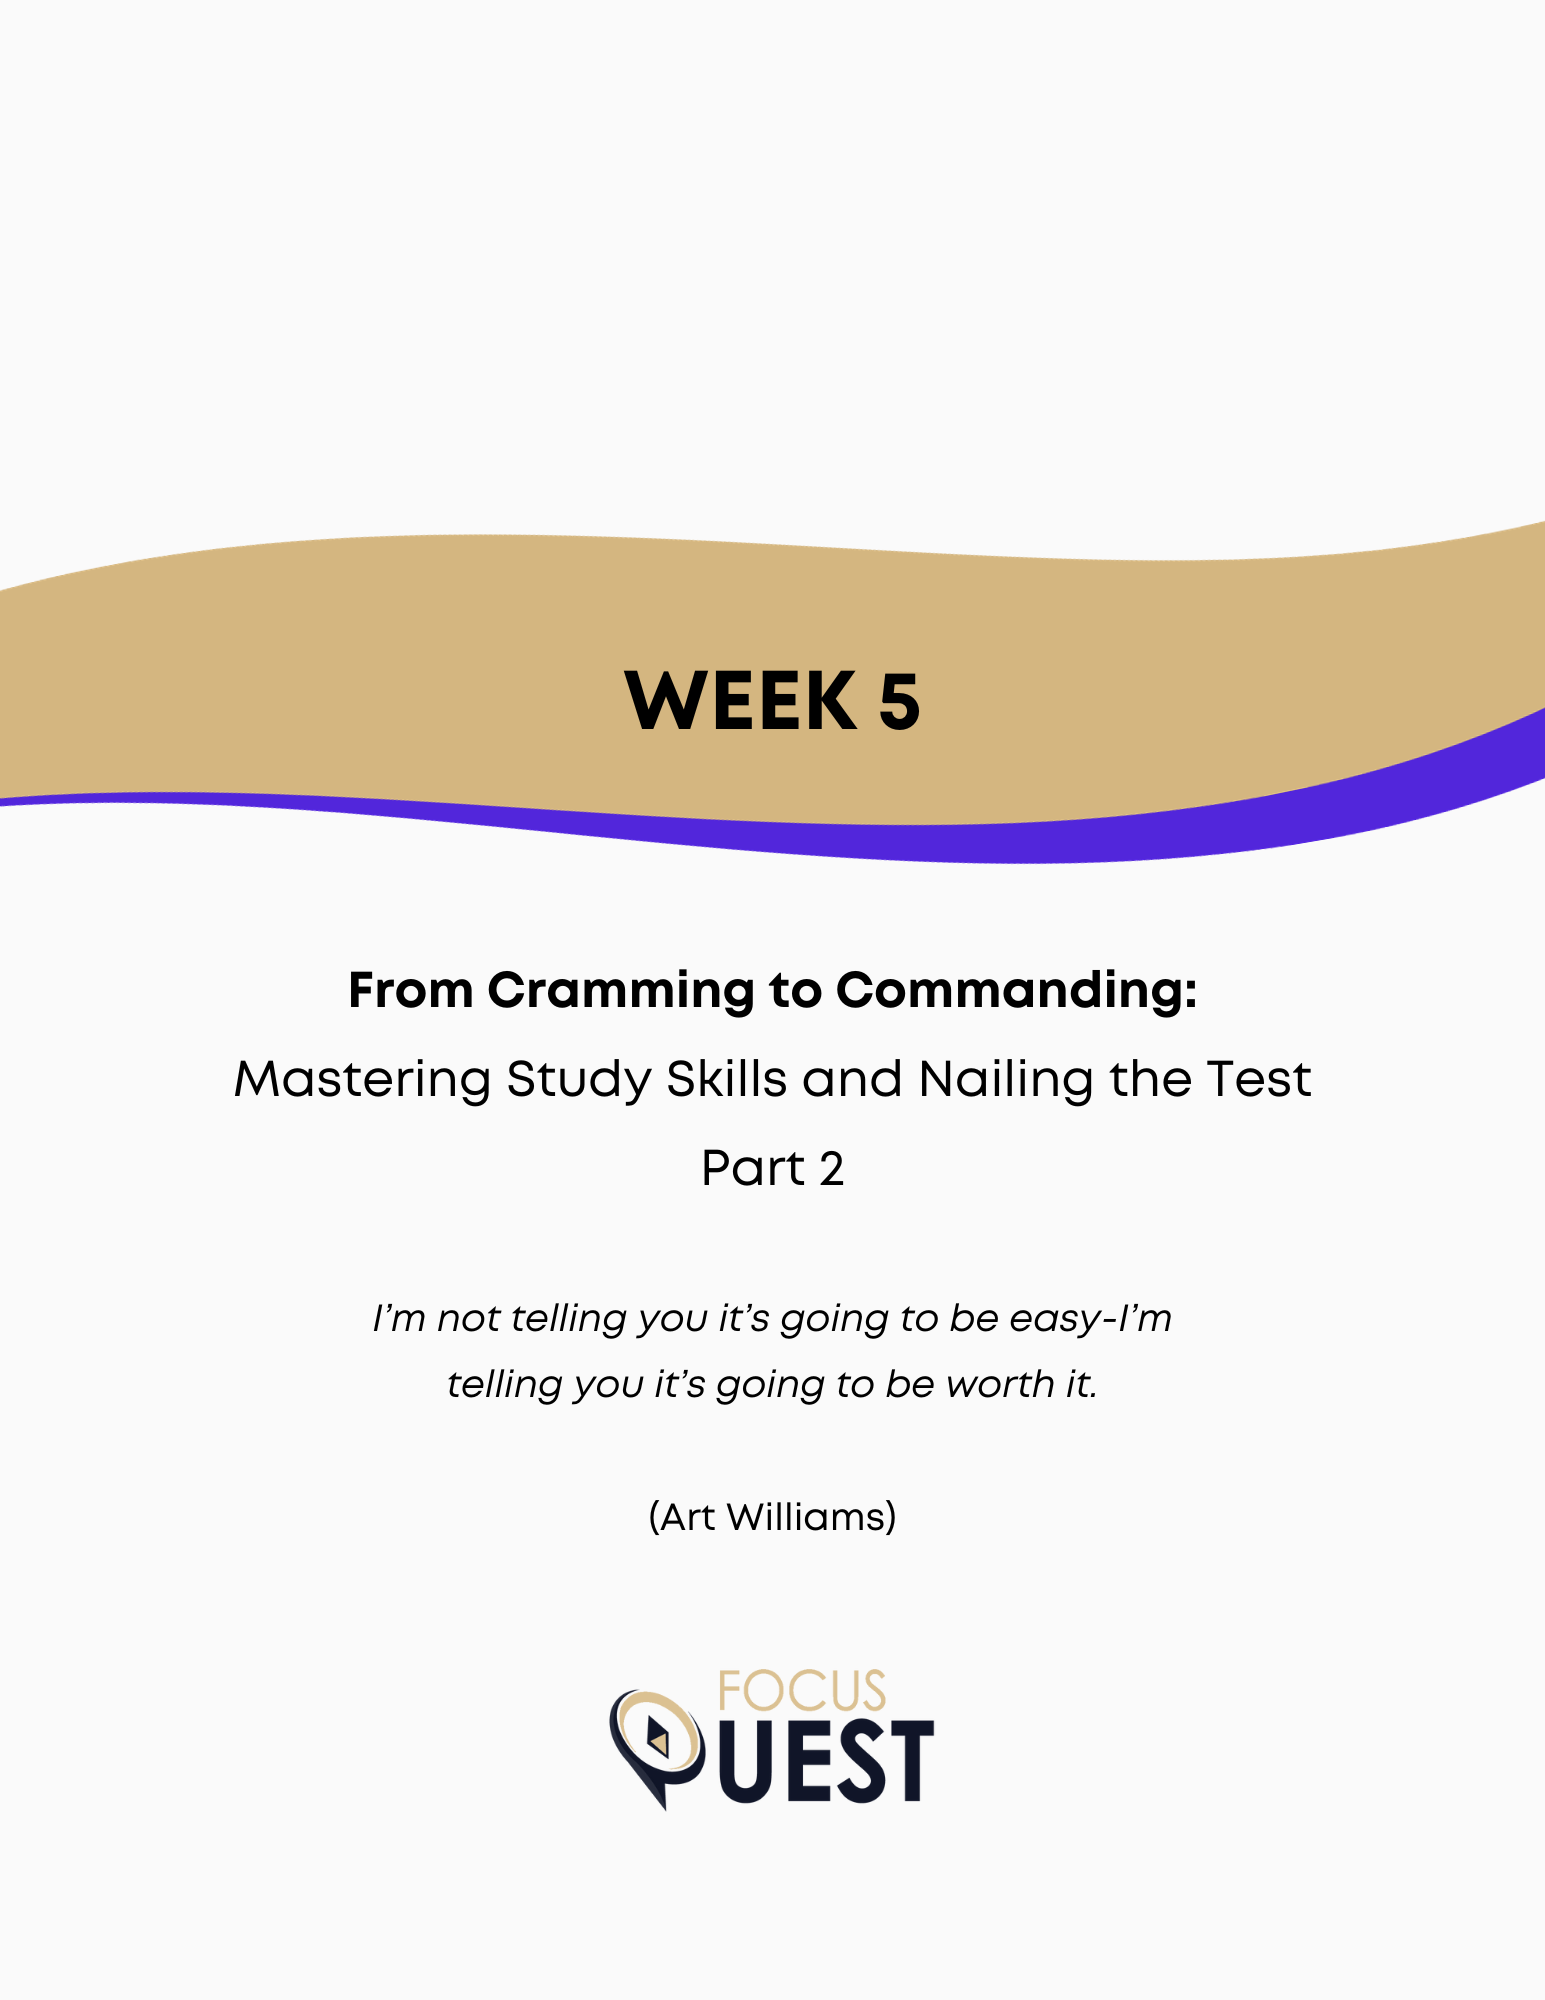 FocusQuest - Quest for Success - Week 5 - From Cramming to Commanding: Mastering Study Skills and Nailing the Test Part 2